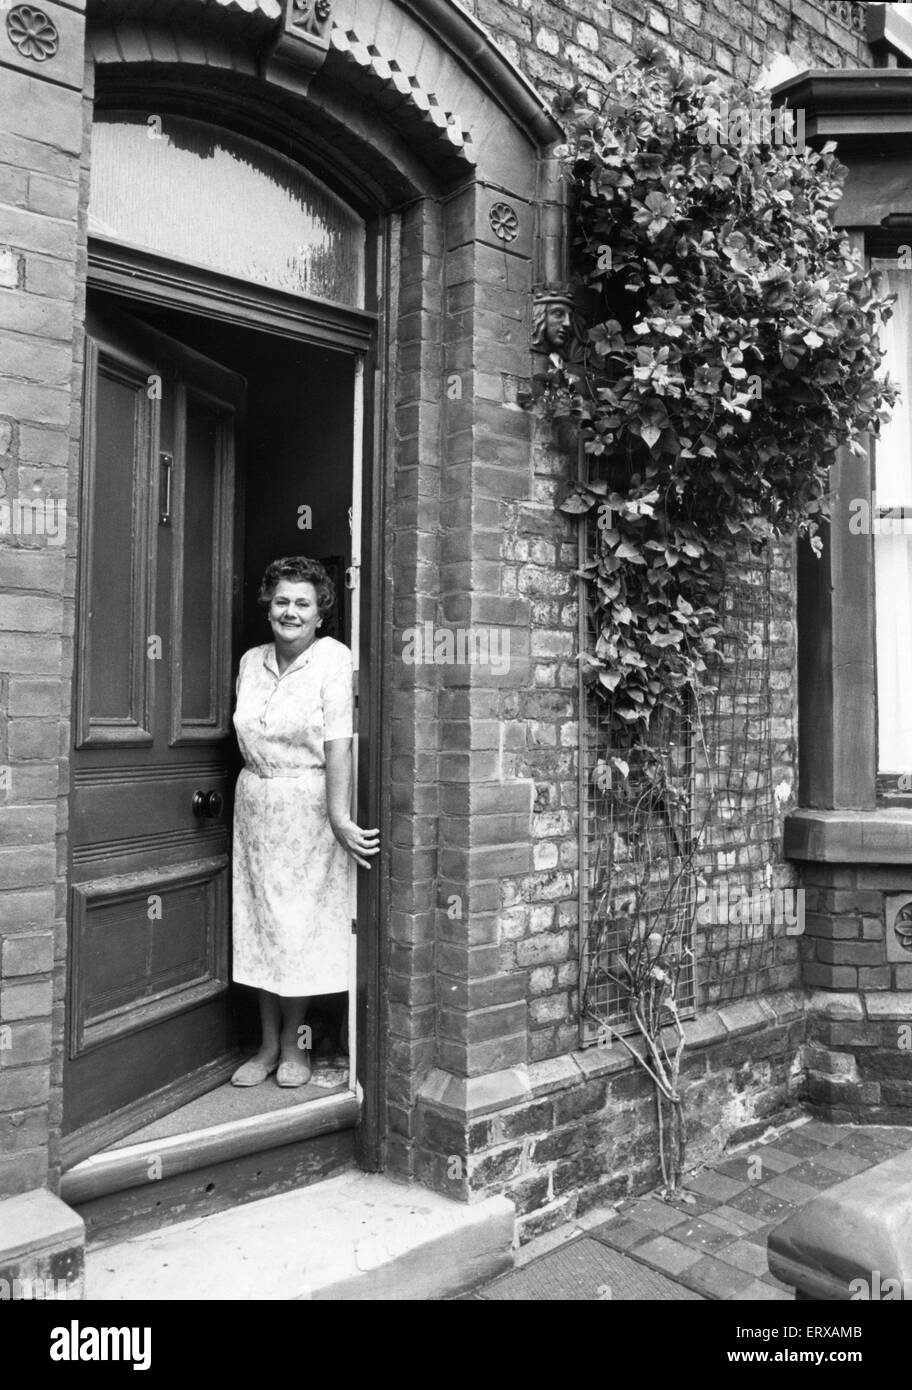 Mrs Doris Atkins of Skerries Road, Anfield who along with other local residents living in the shadow of Liverpool F.C. Anfield stadium are asking for the area to be tidied up.  10th August 1987 Stock Photo